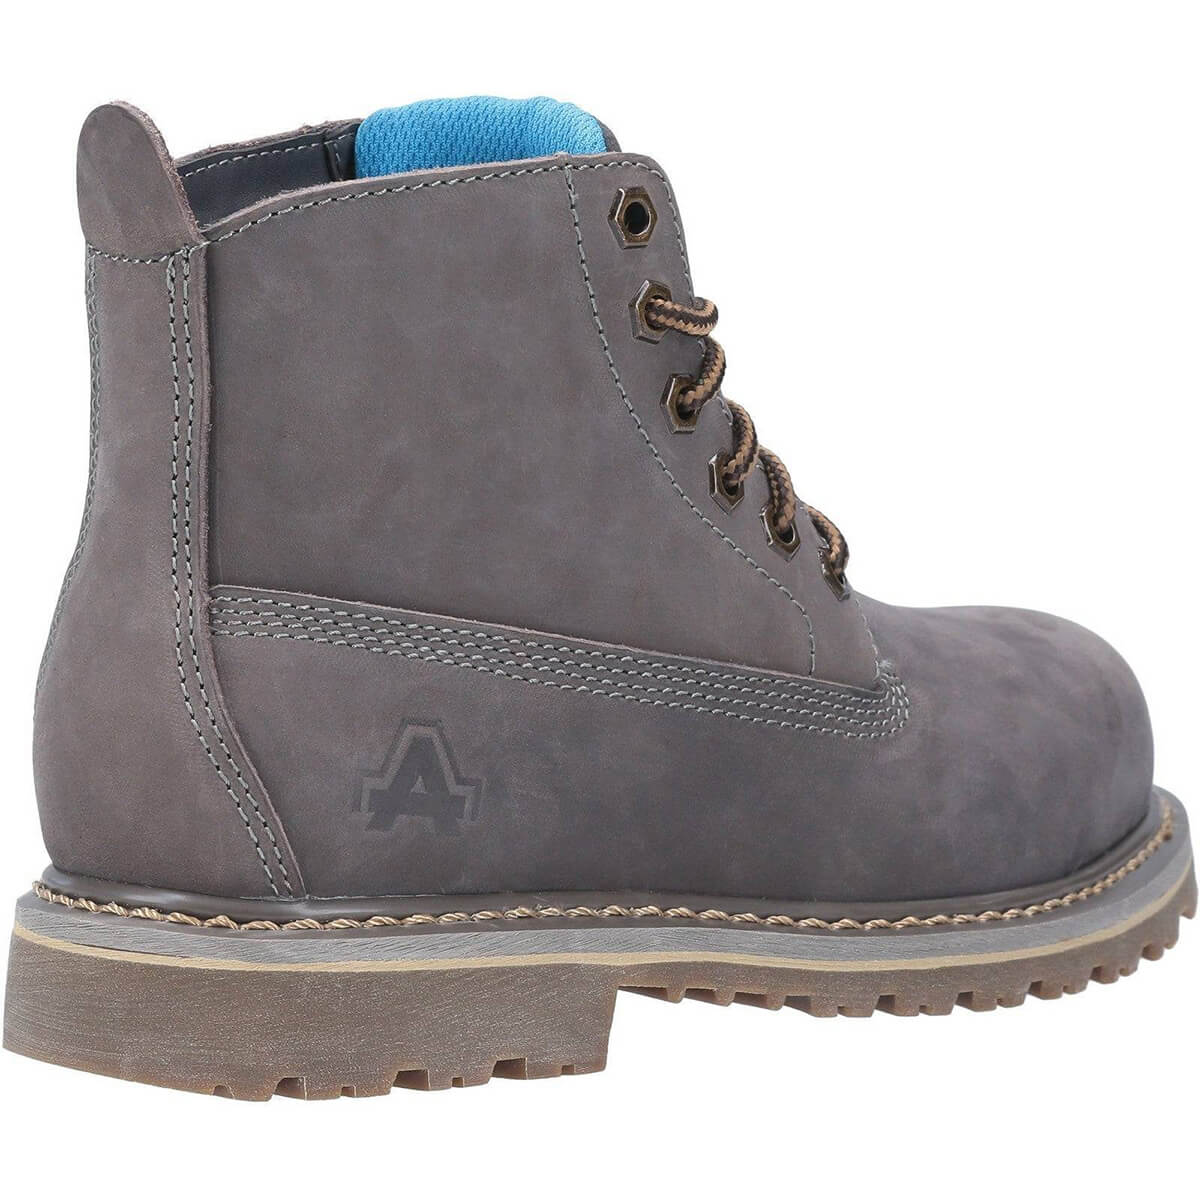 Amblers AS105 Mimi Ladies Steel Toe Cap Safety Boots - Shoe Store Direct